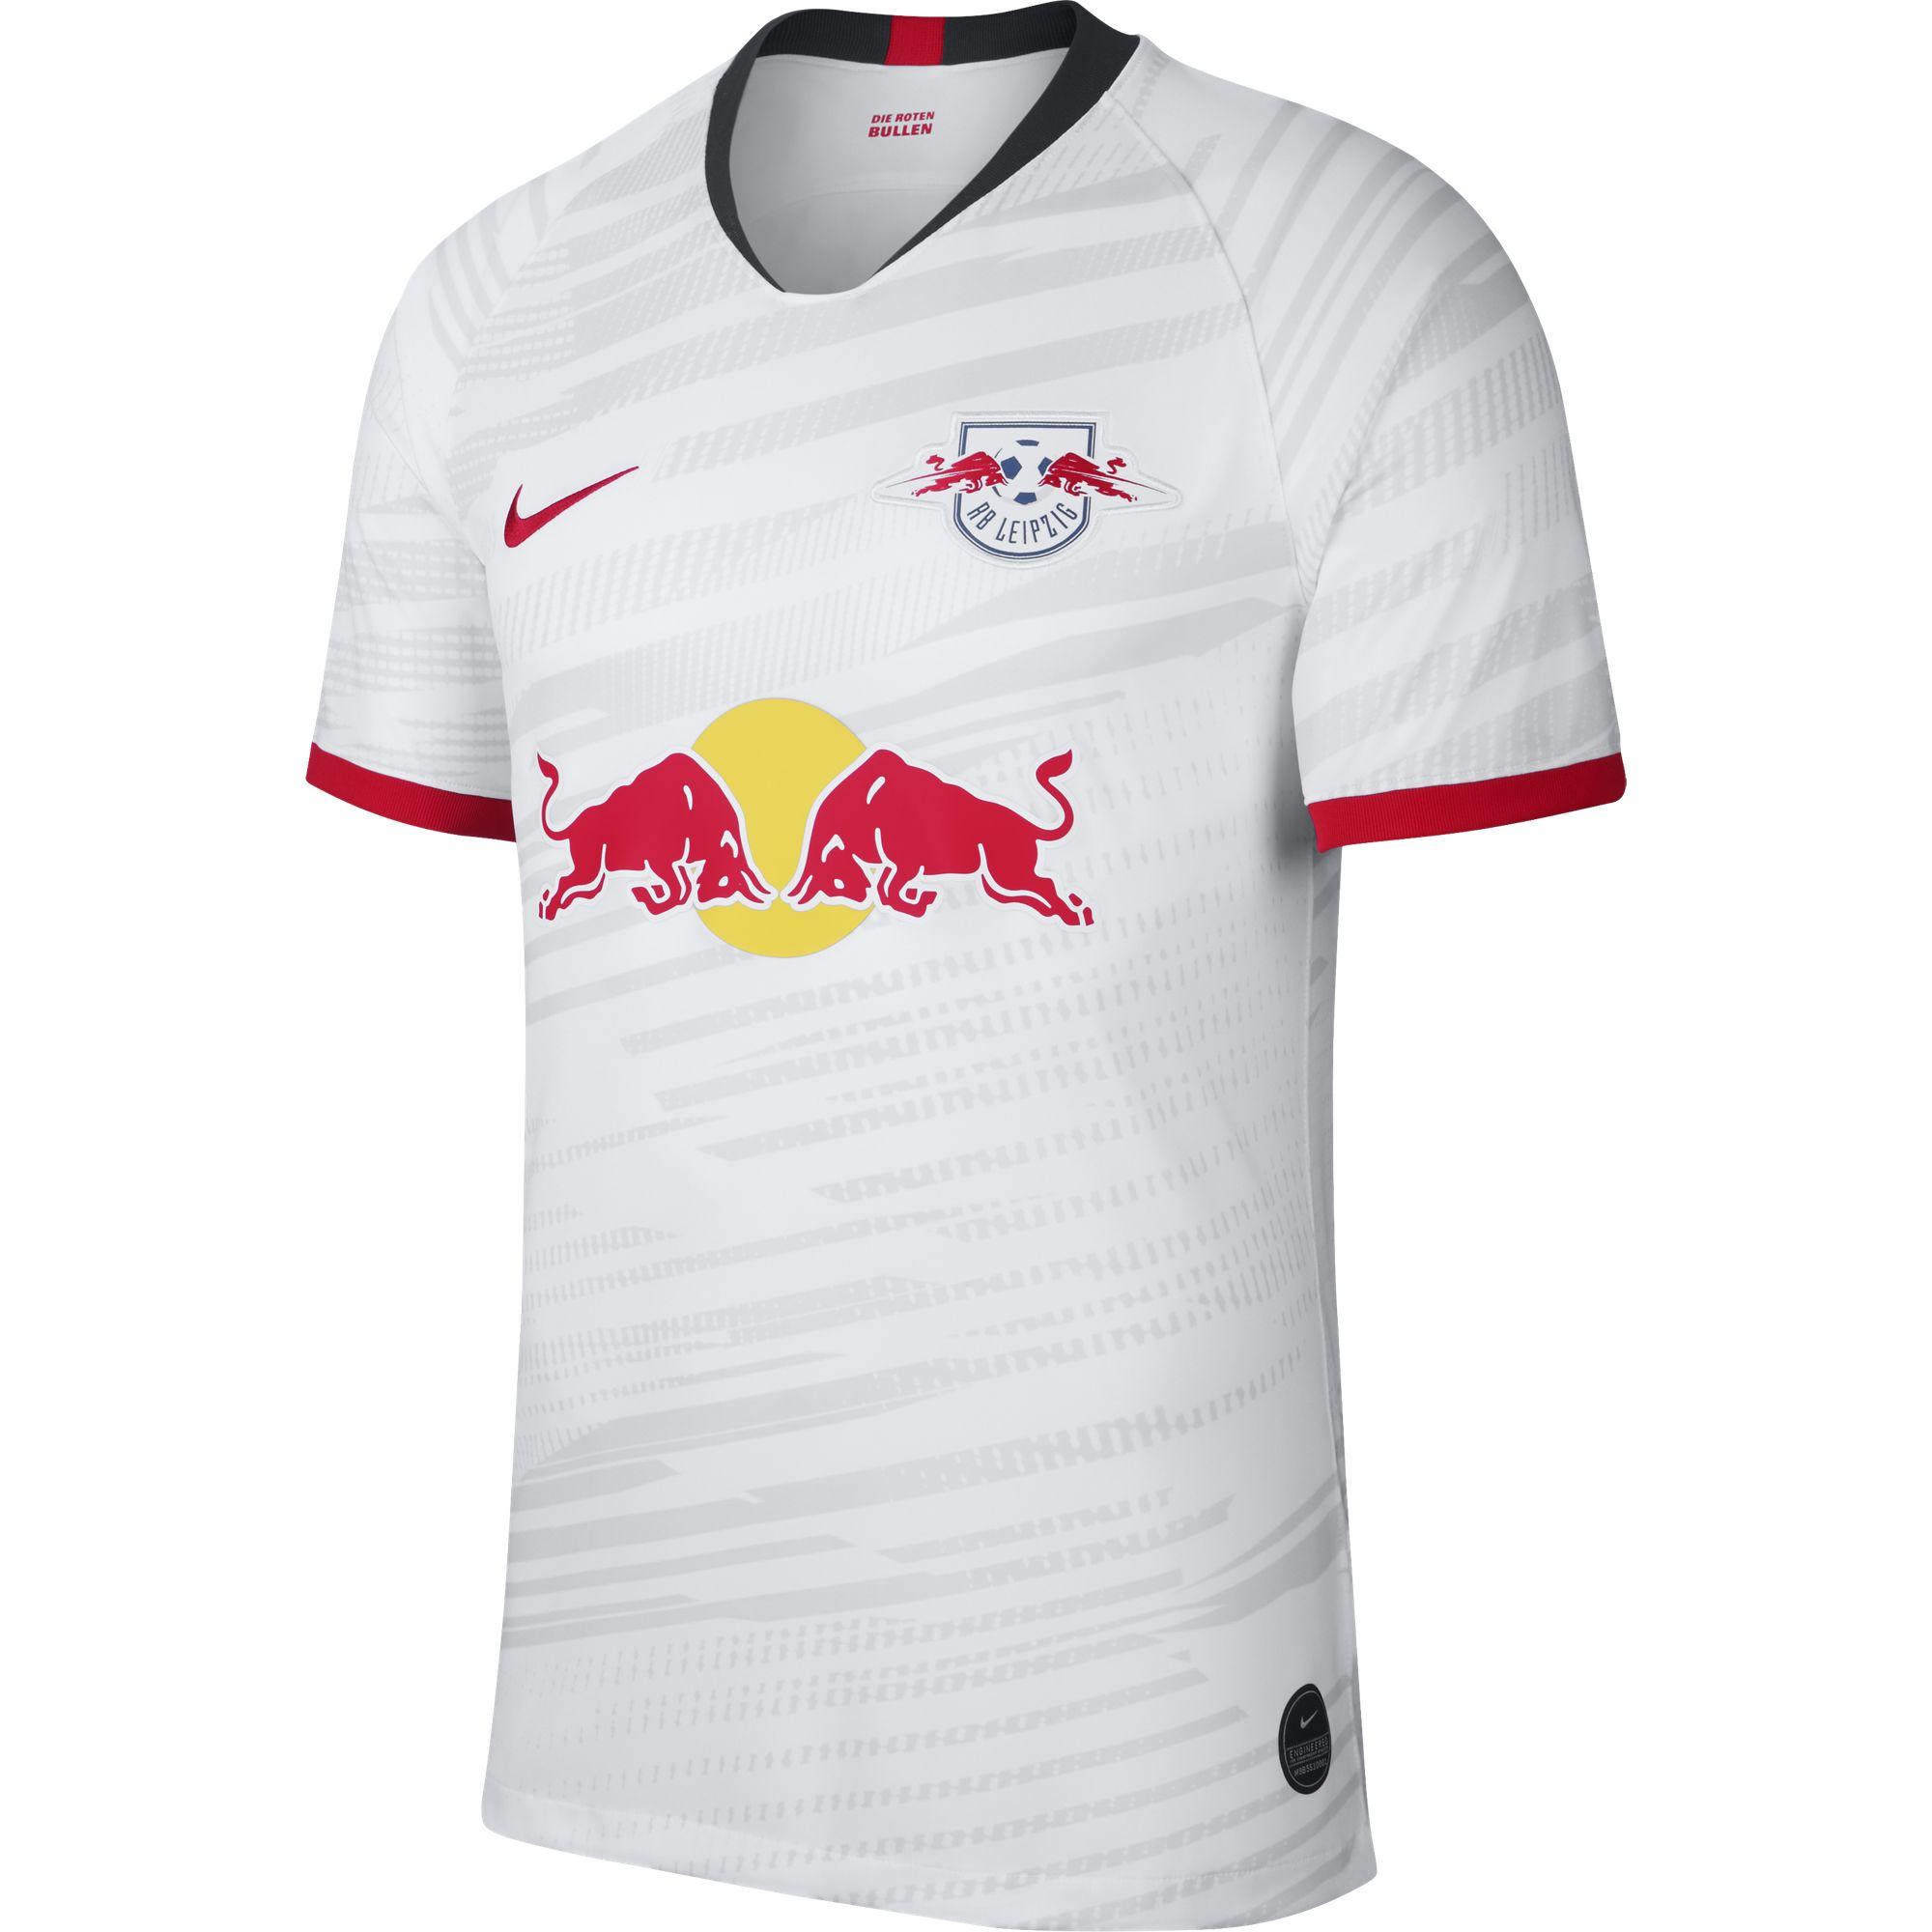 Nike Jersey Home Rb Leipzig   19/20